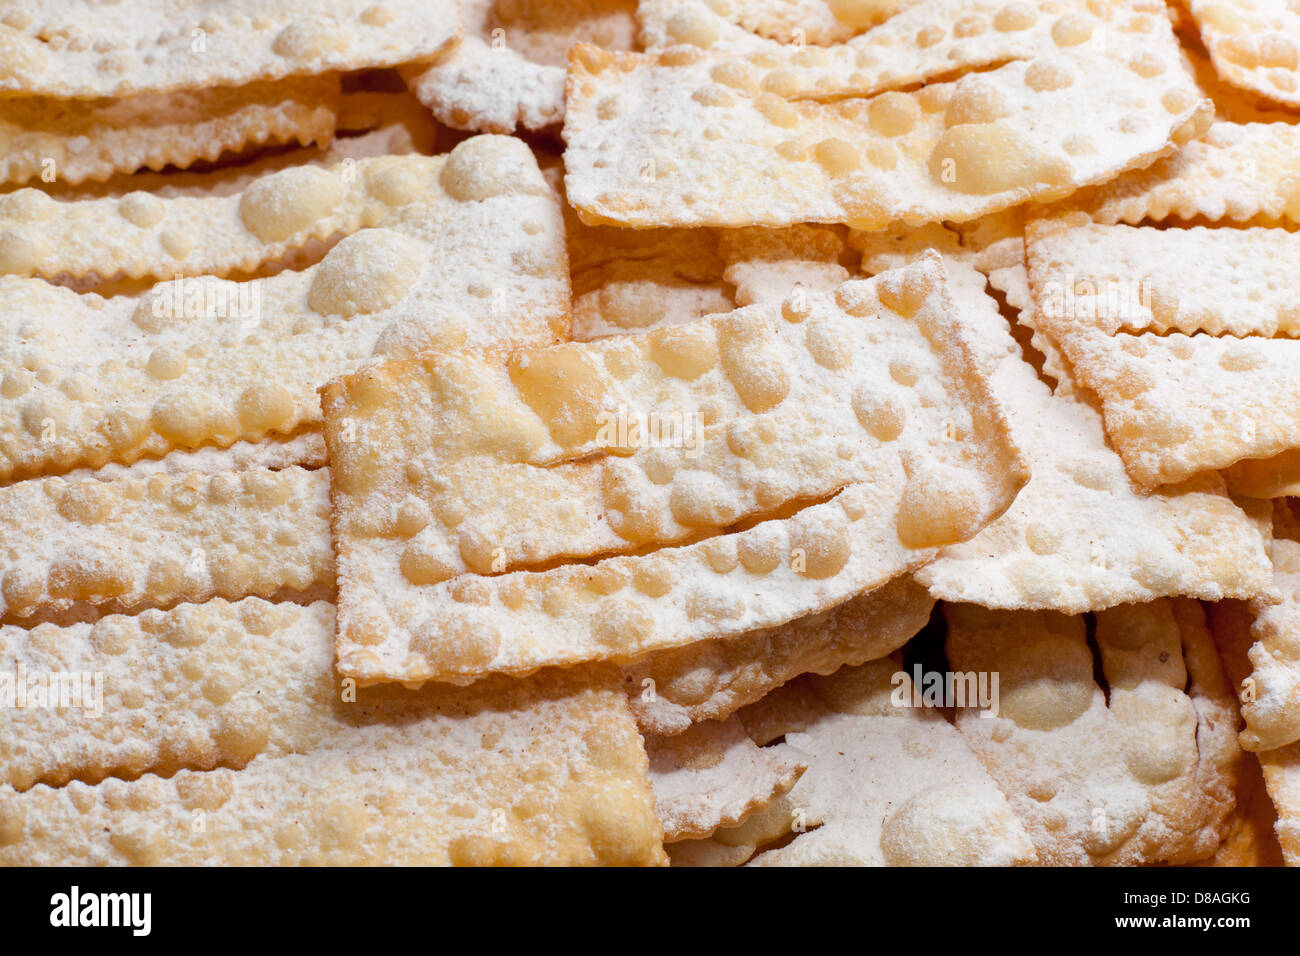 Chiacchiere or frappe italian cake on table Stock Photo